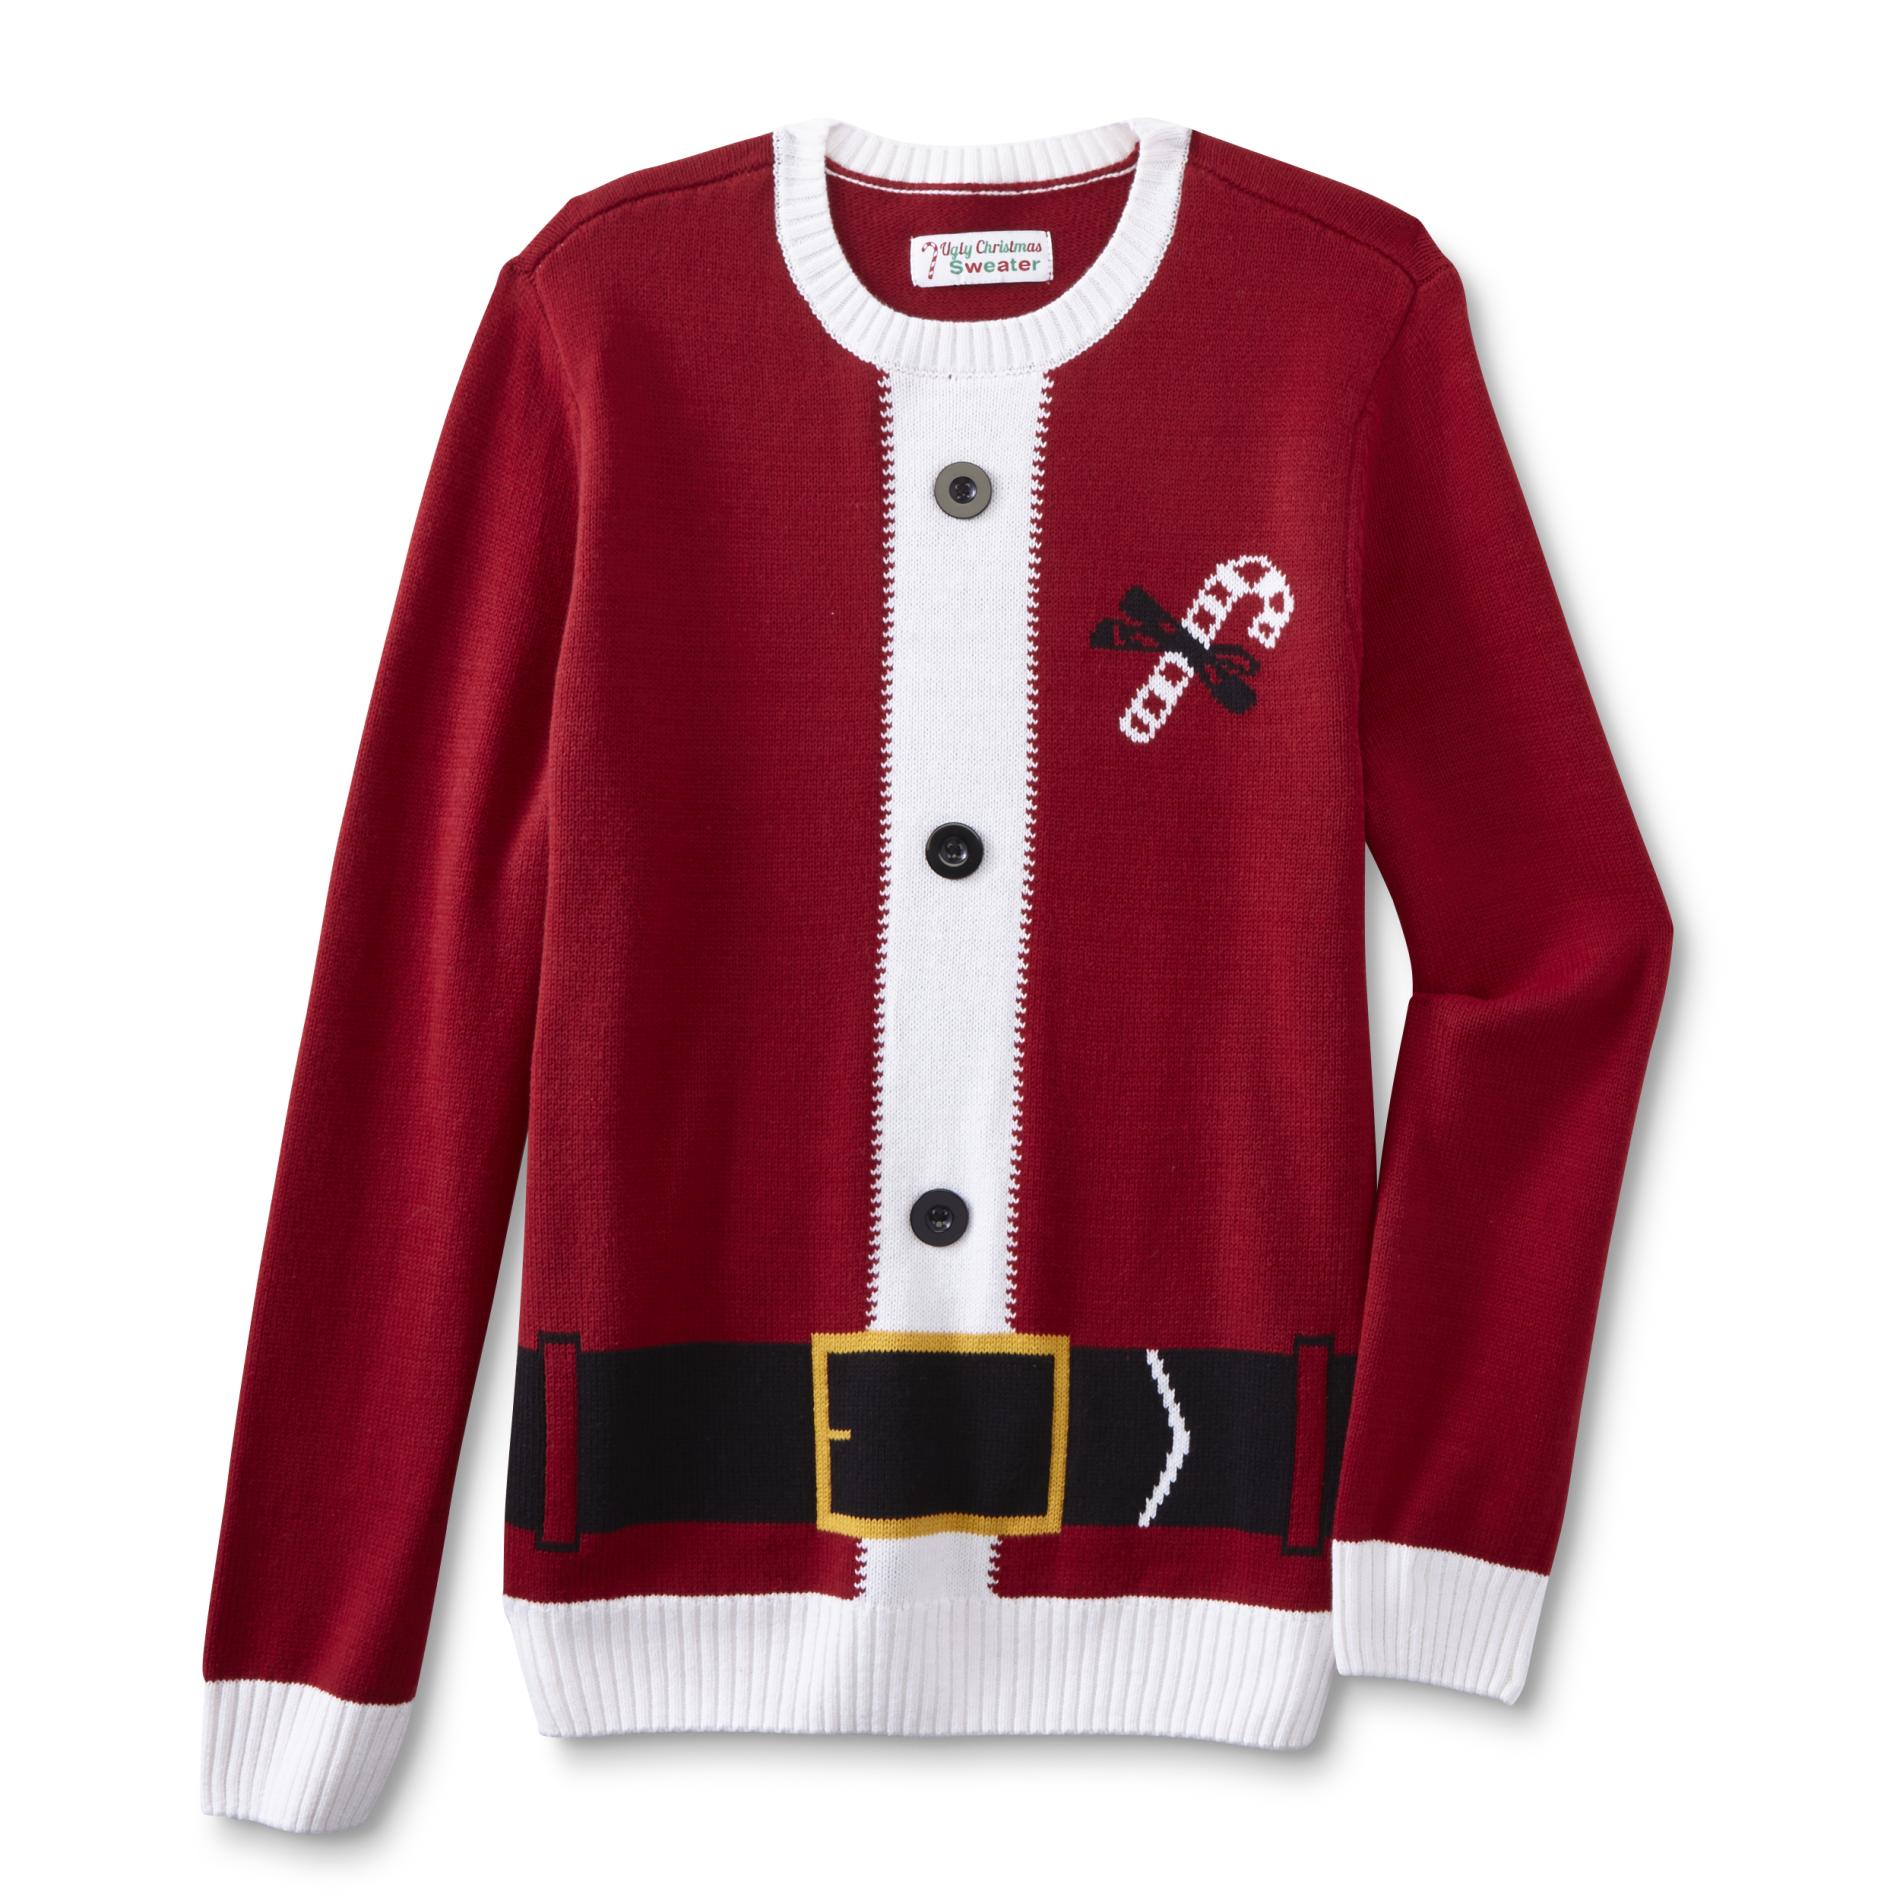 Young Men's Ugly Christmas Sweater - Santa Suit